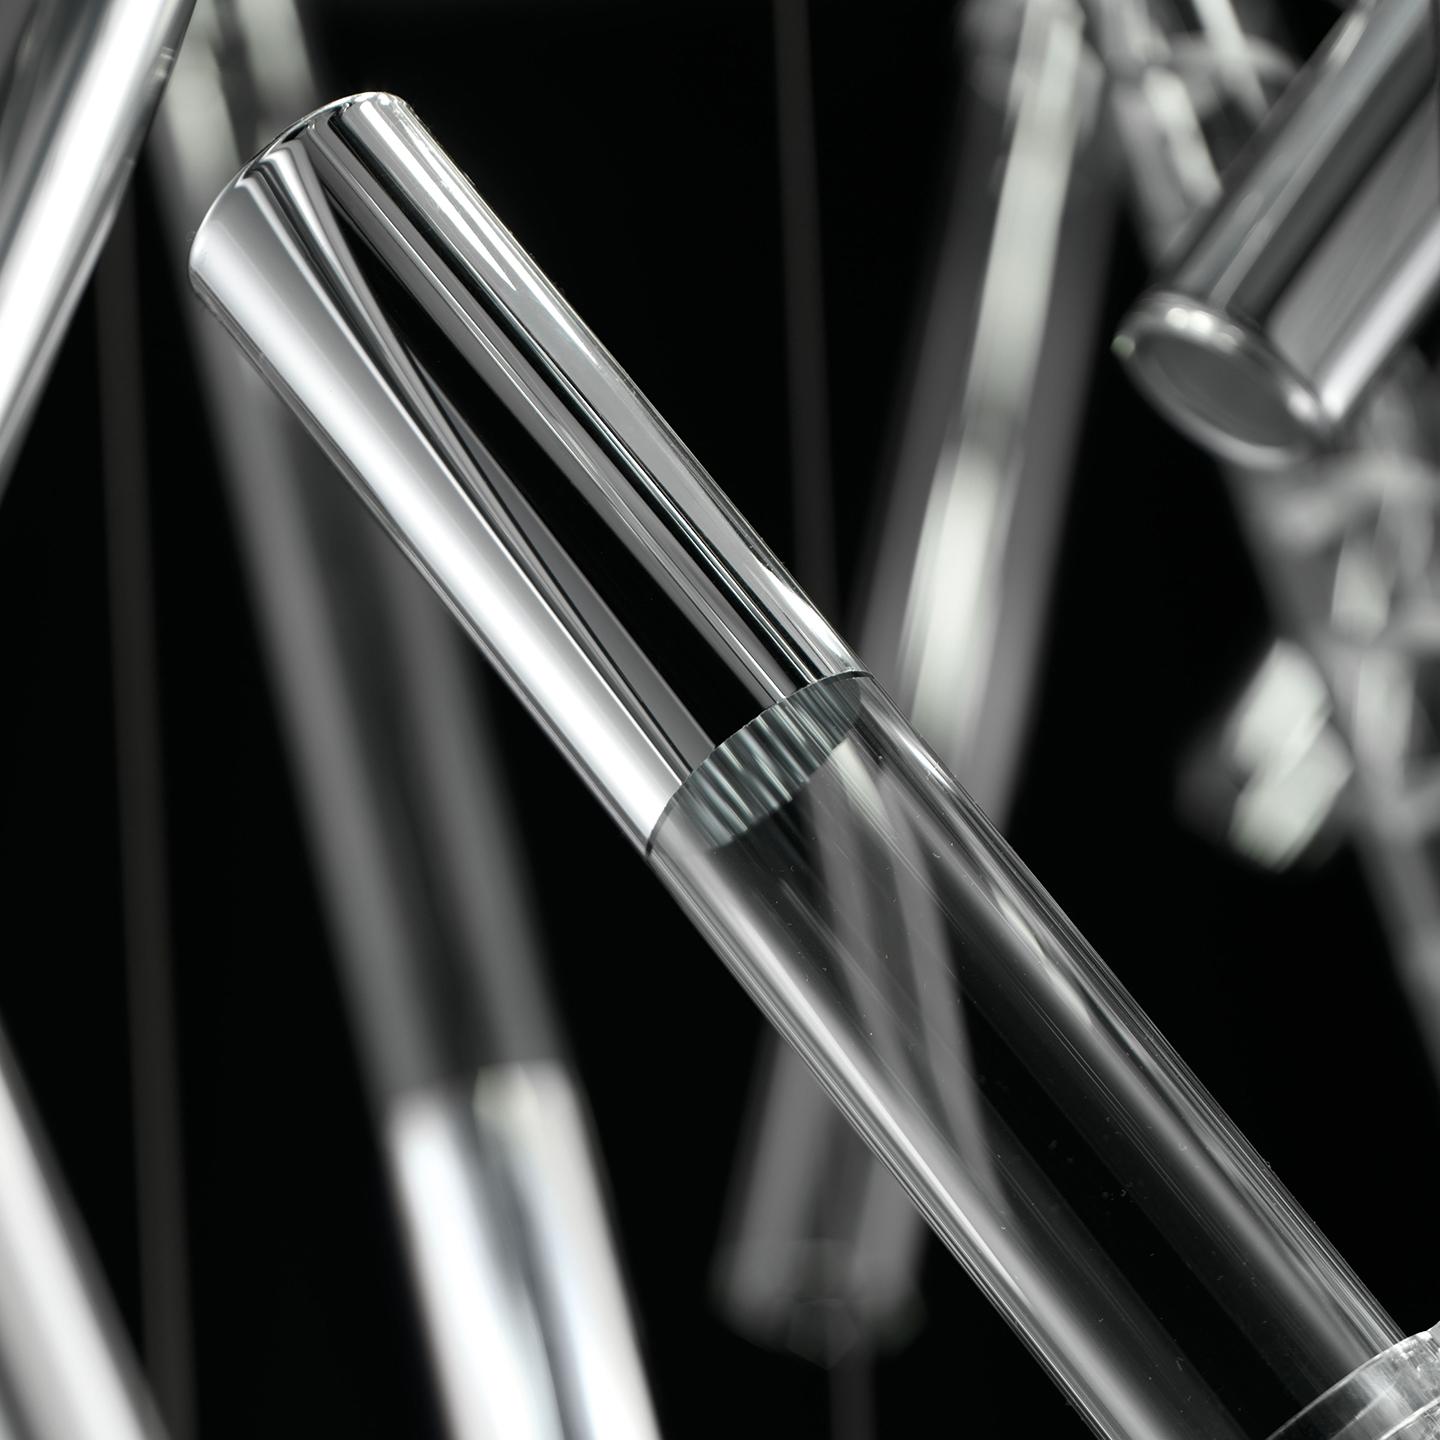 Ixi, designed by Filippo Caprioglio, is a system of beautiful handmade cylindrical glass rods with reflective metal decorations. Each Ixi rod is light, simple and airy—but placed together as a group they create a stunning visual effect that is